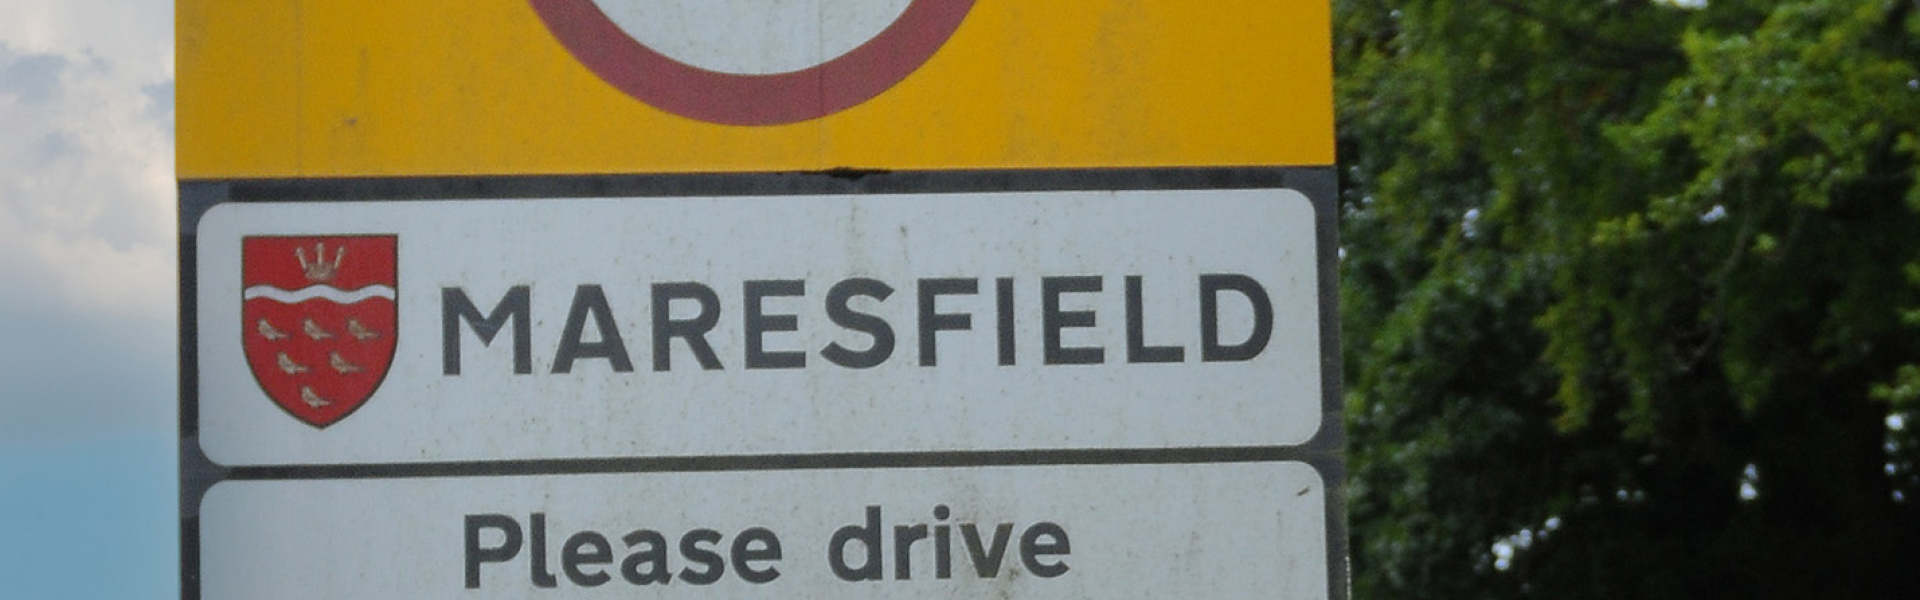 Maresfield sign